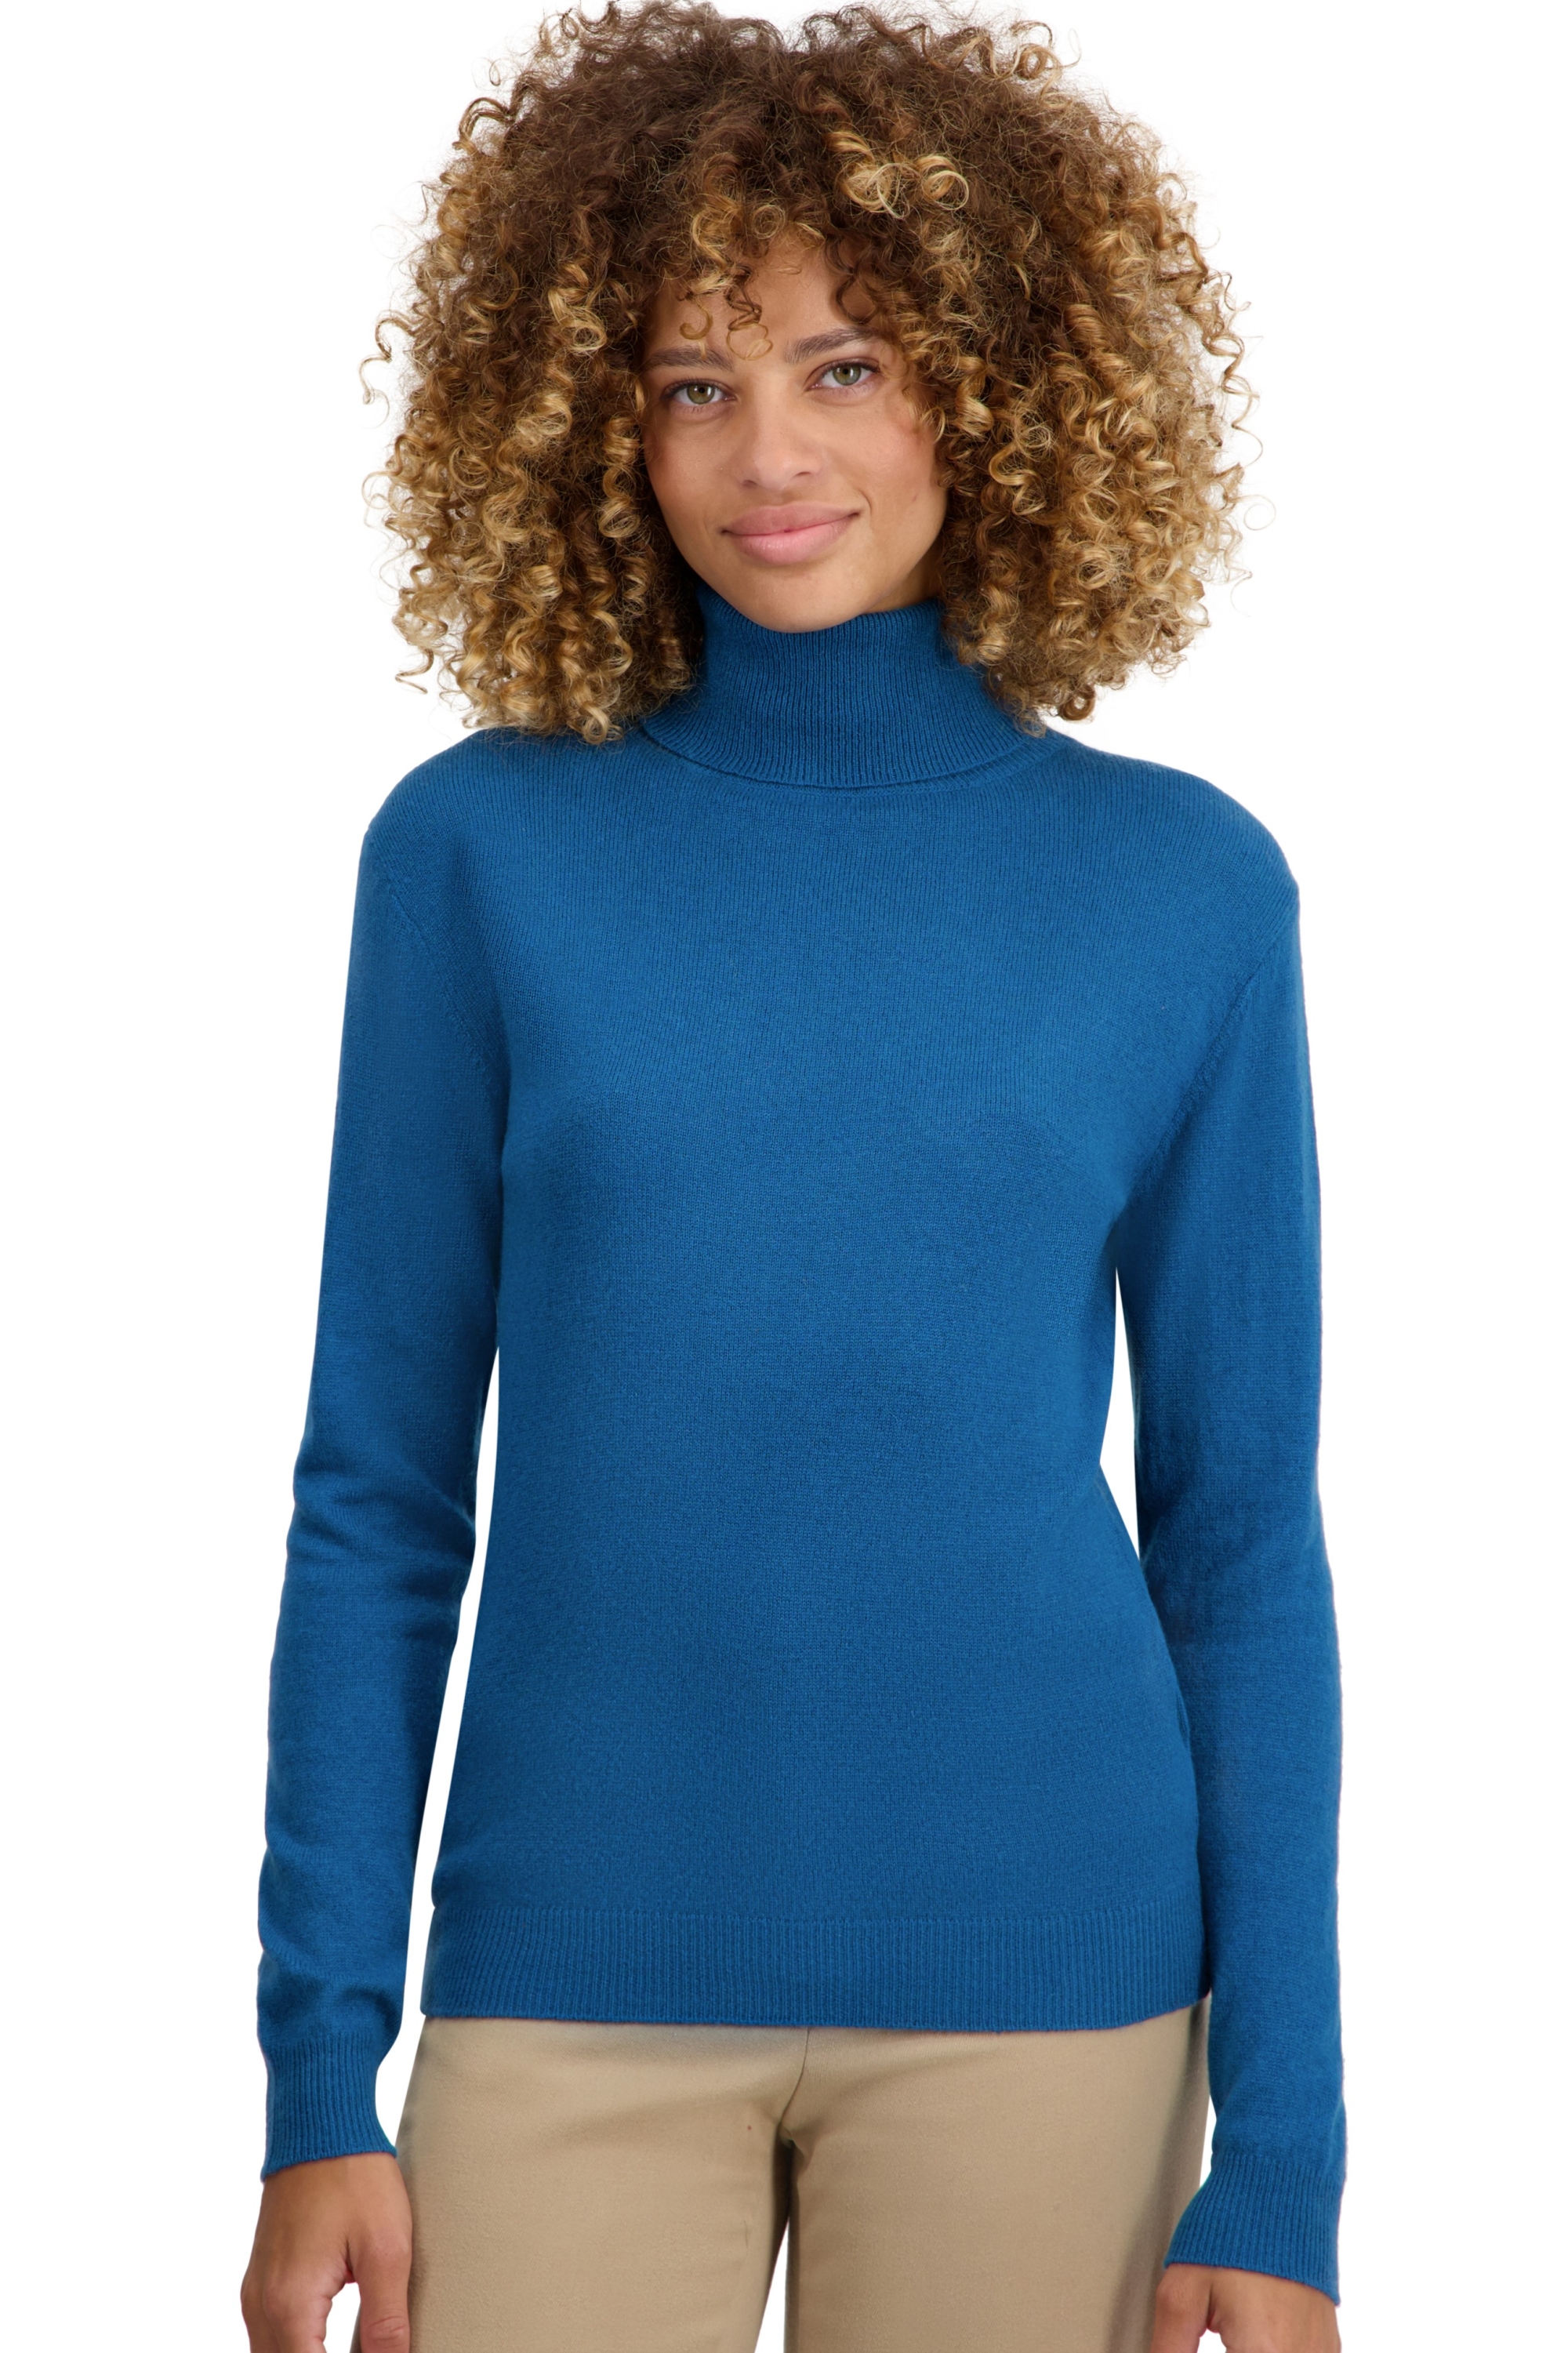 Cashmere ladies basic sweaters at low prices tale first everglade xl